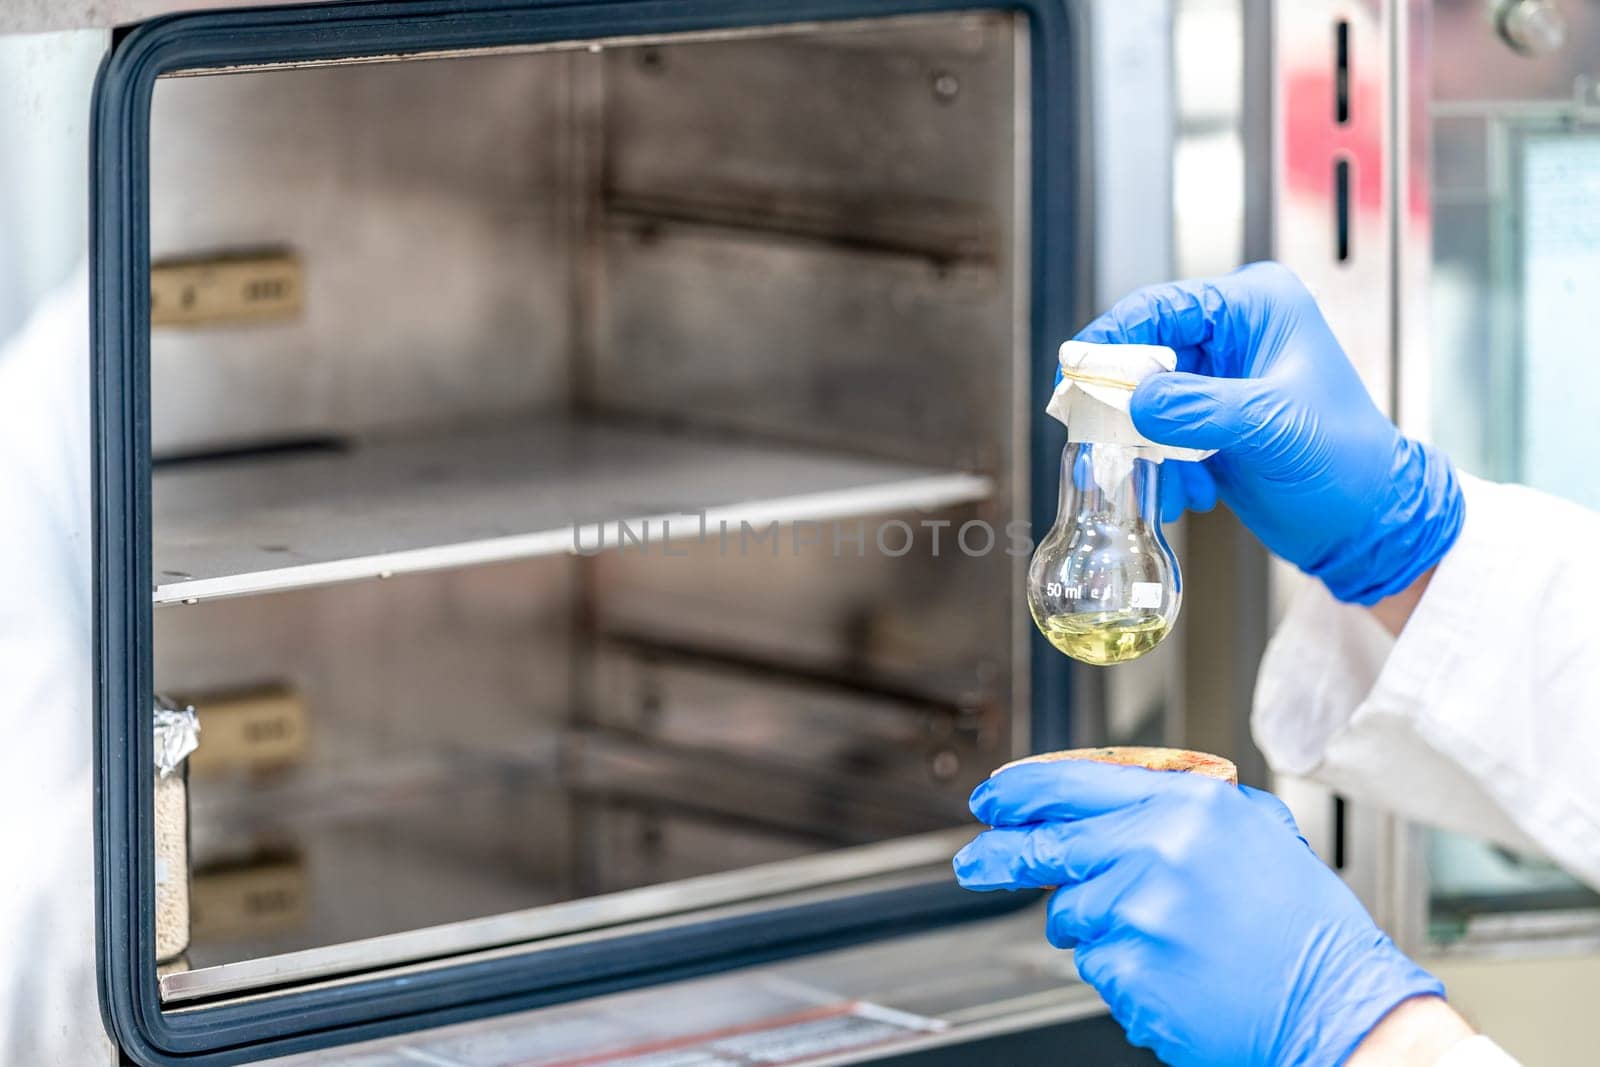 heating a chemical sample in a furnace in a research scientific laboratory. High quality photo